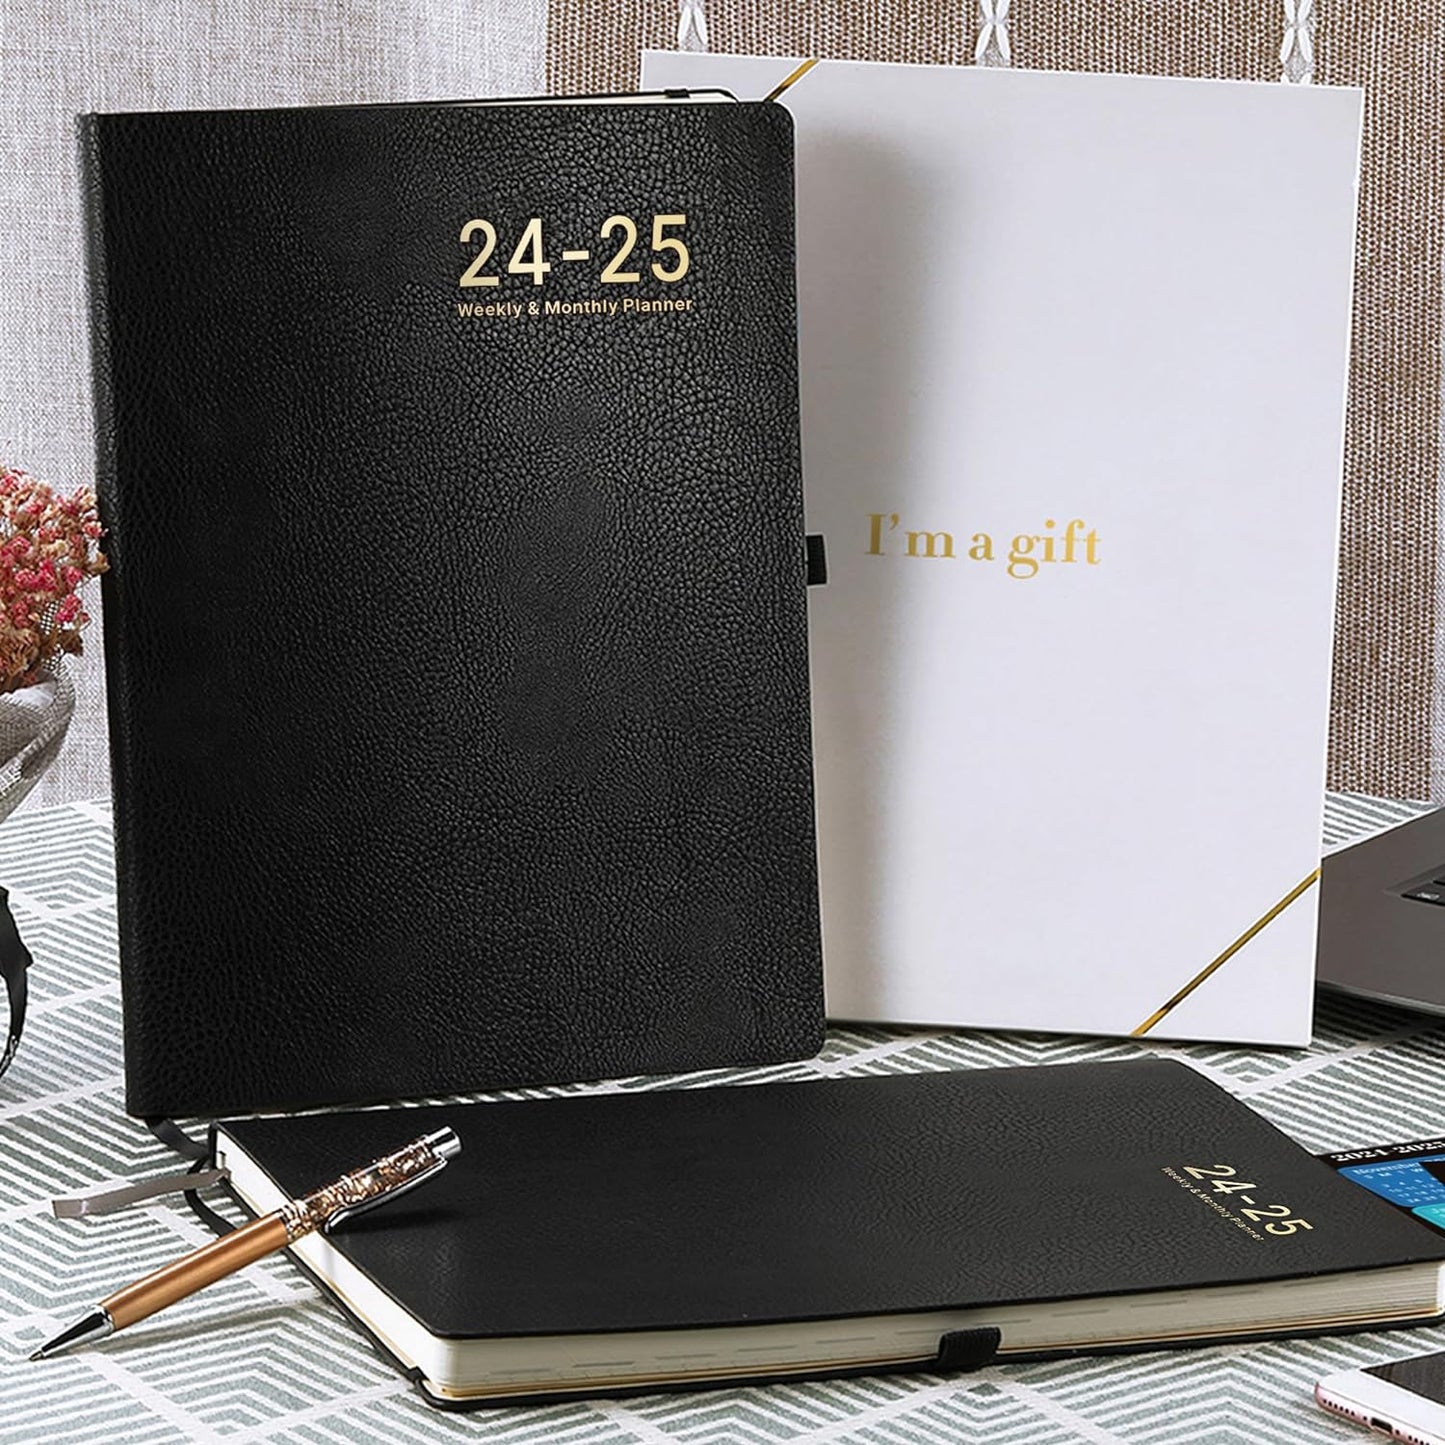 2024-2025 Planner - Weekly Monthly Planner 2024-2025, JUL 2024 - JUN 2025, 8.5" X 11", Leather Cover Planner 2024-2025 with Thick Paper, Back Pocket with Notes Pages - Black